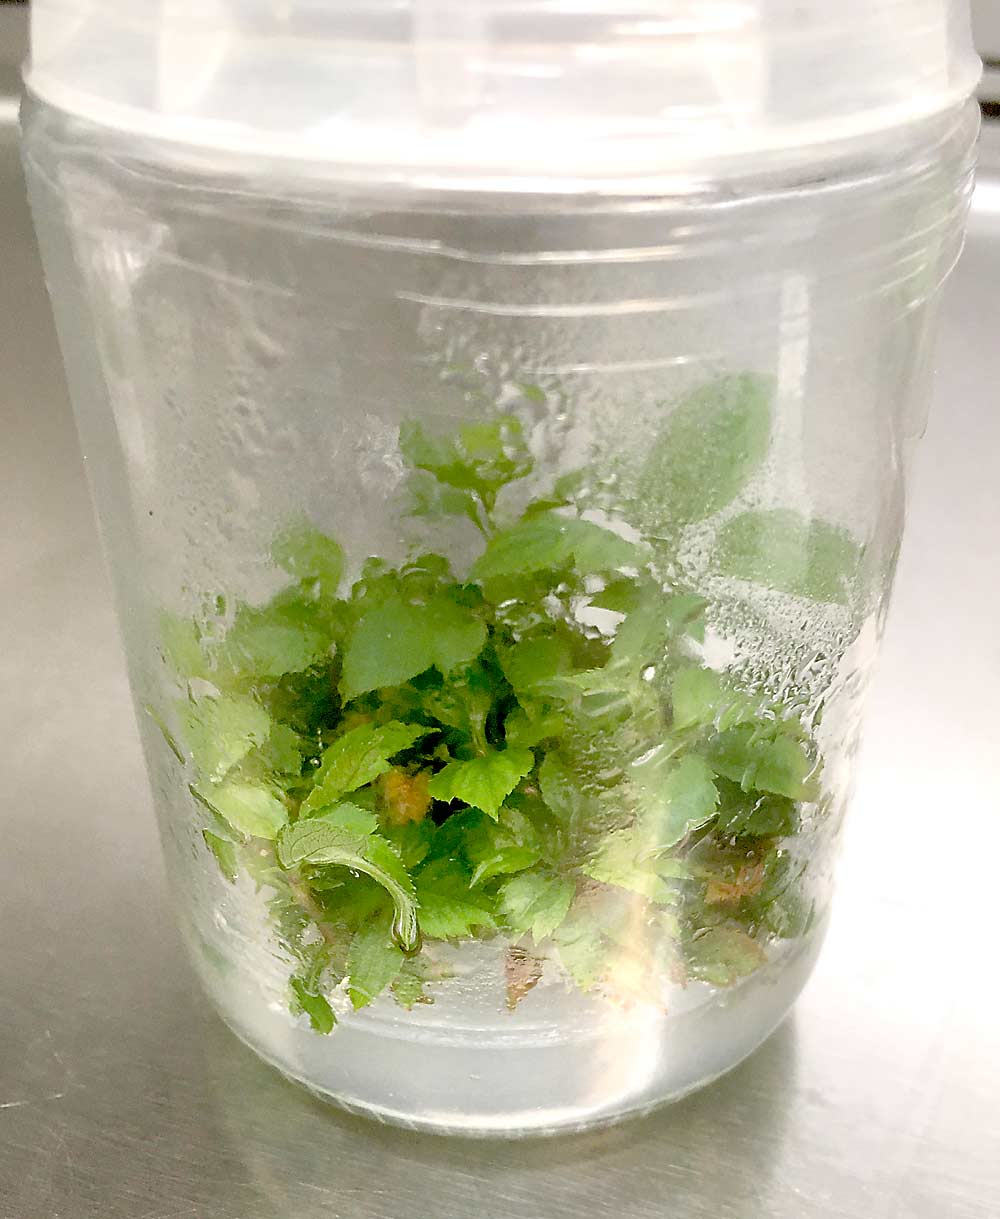 Geneva rootstock, eight to nine months after thermotherapy and cryotherapy treatments. A U.S. Department of Agriculture study has found that a combination of thermotherapy and cryotherapy can fully eliminate certain viruses from rootstock. (Abby Nedrow/Cornell AgriTech)